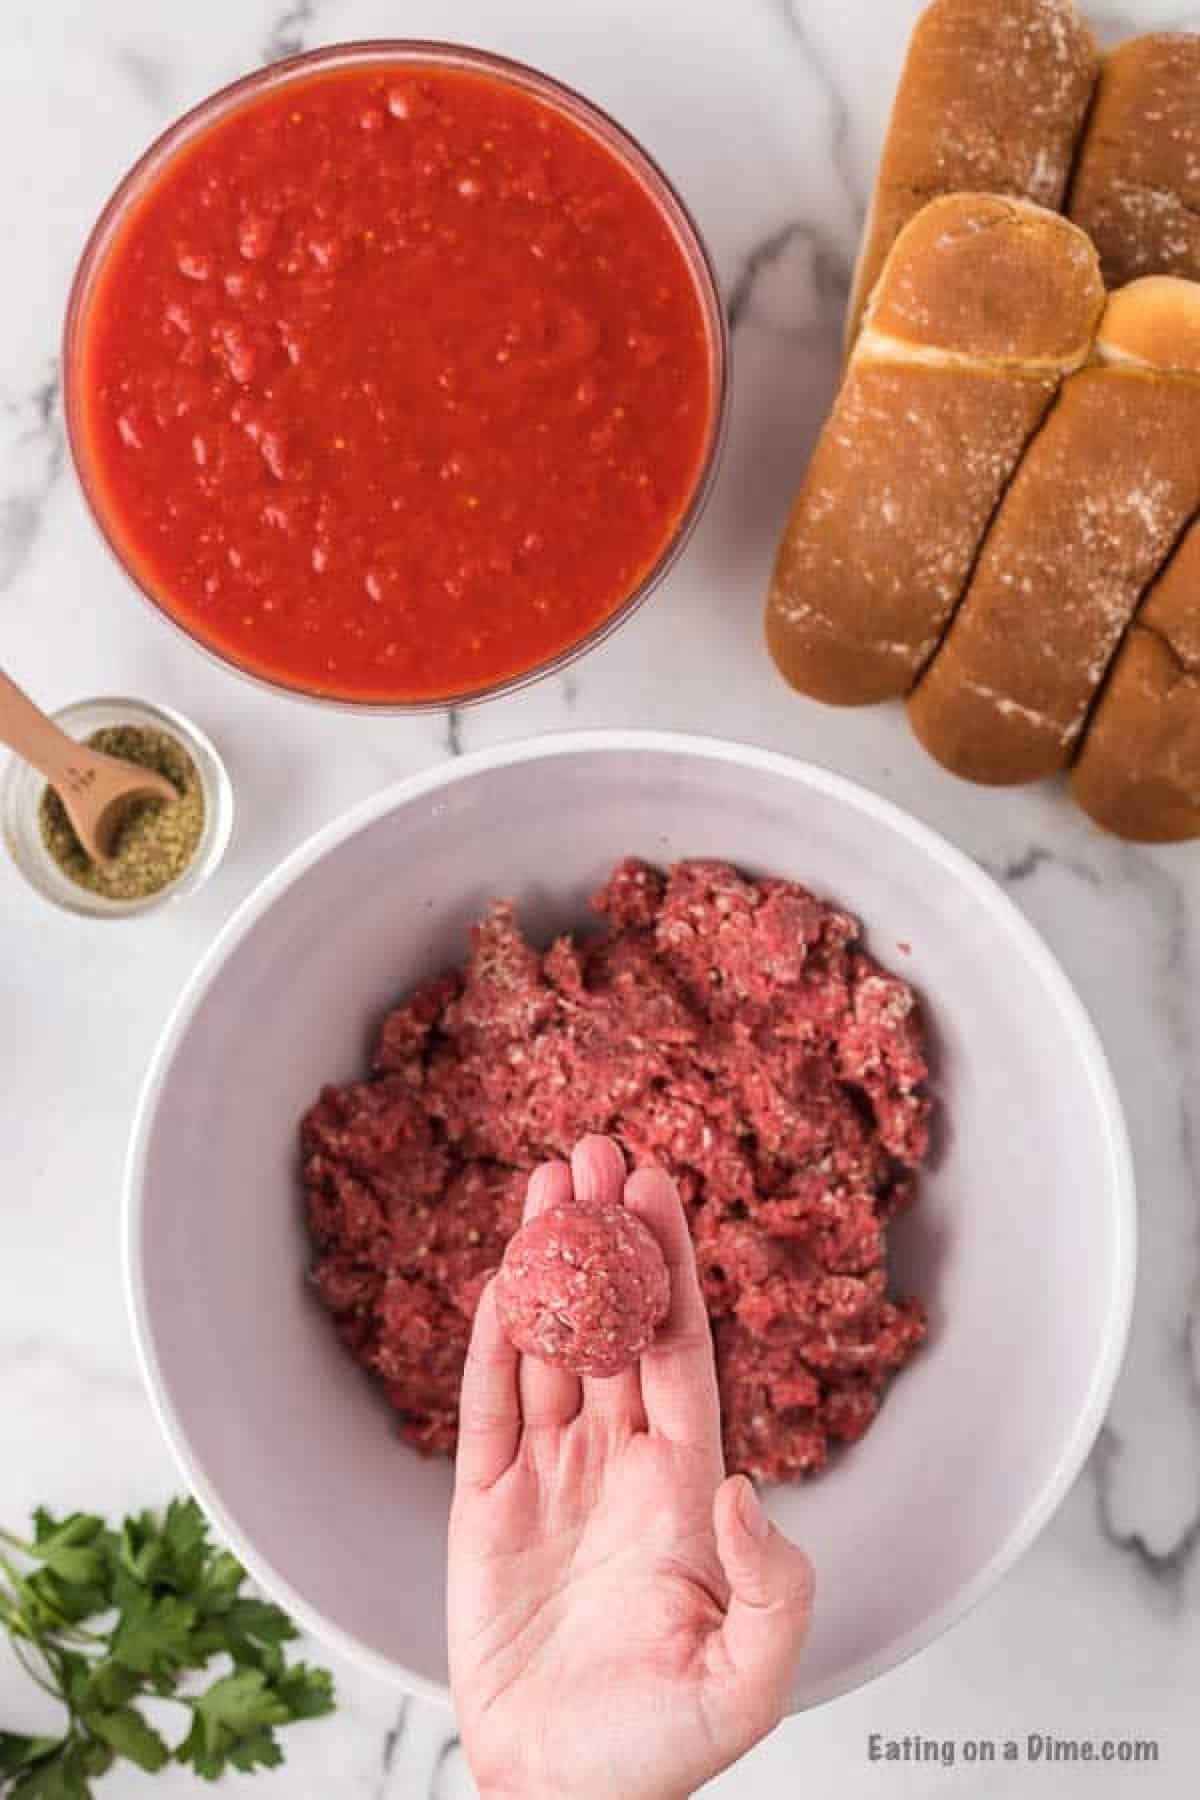 Ground beef mixture in a bowl with a hand holding a meatball with a bowl of sauce on the side and seasoning